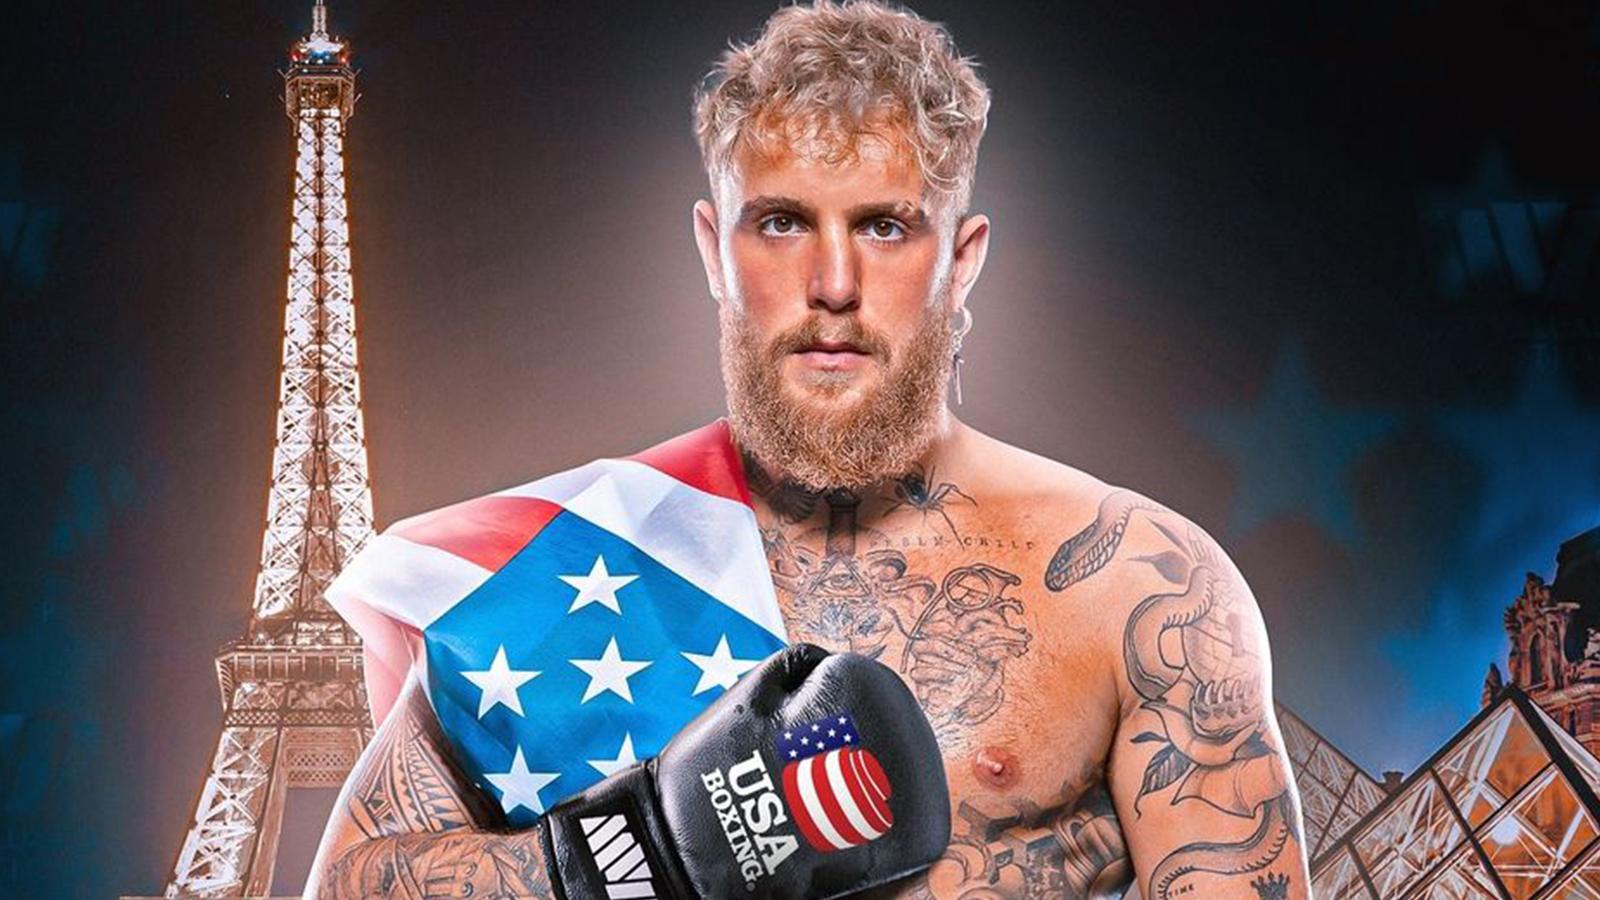 Jake Paul partners with USA Olympic boxing team to promote boxing at